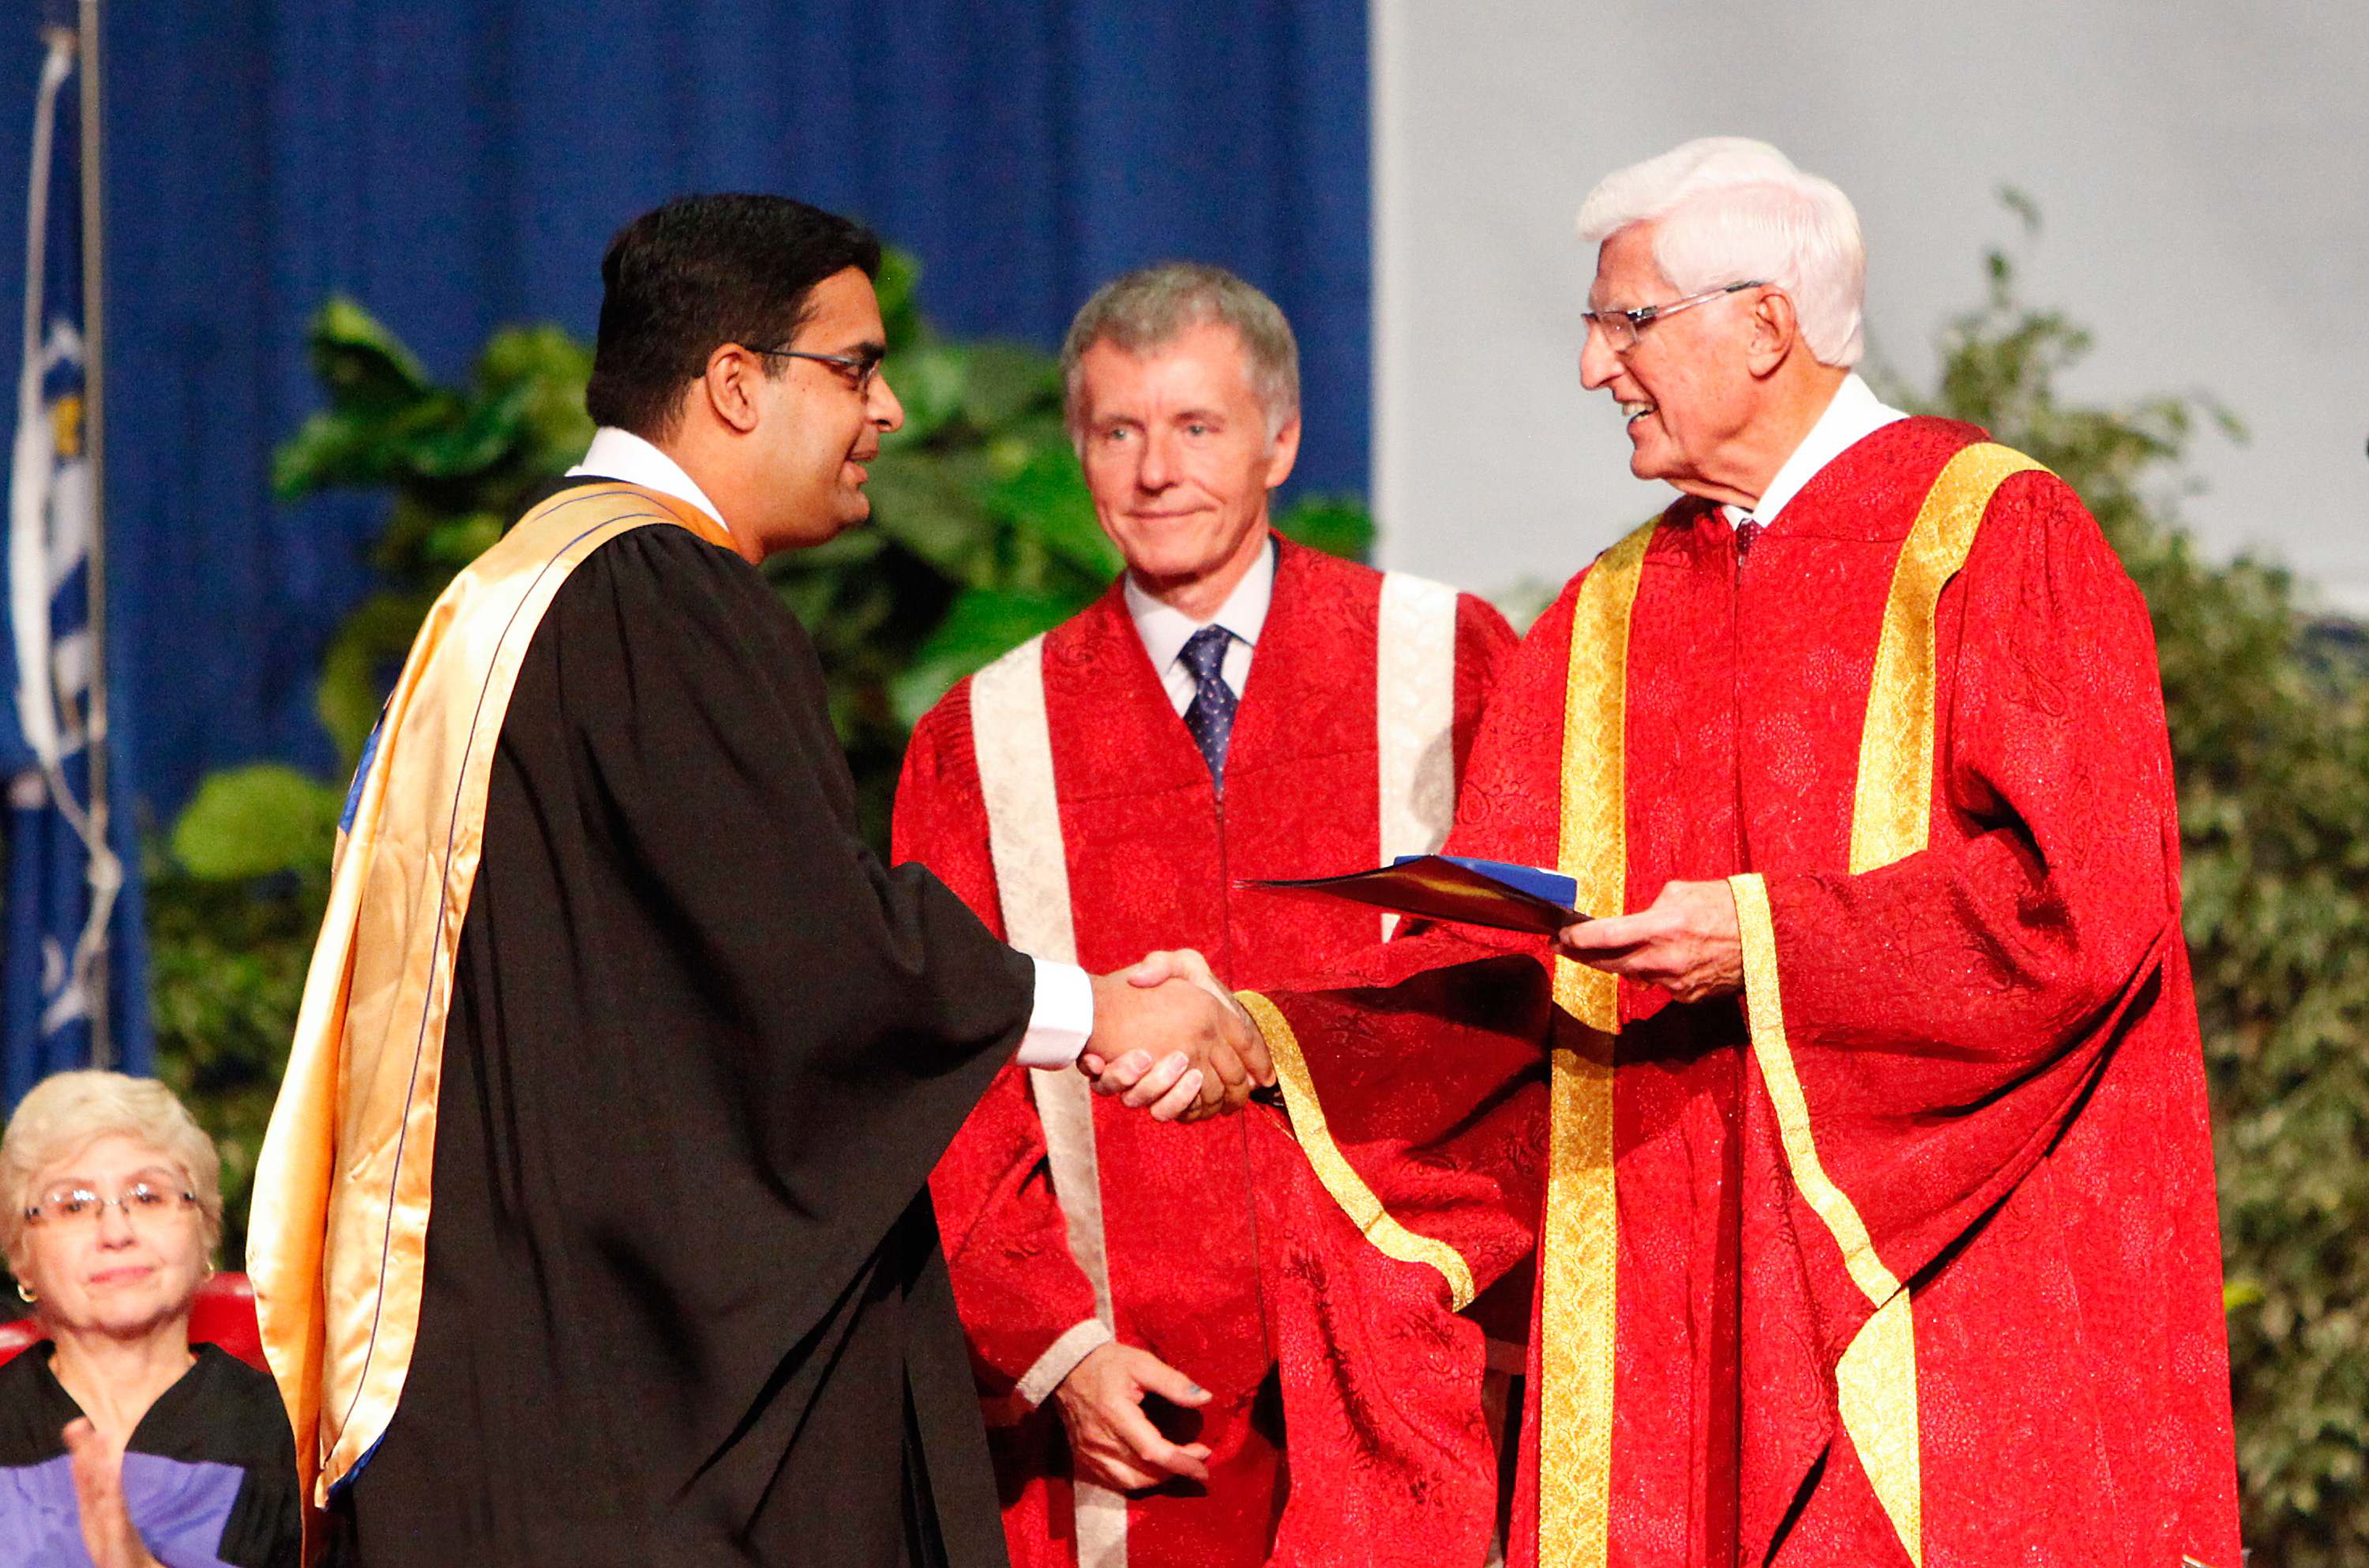 Lakshmi Varaha Iyer, a recipient of the Governor General’s Gold Medal, receives congratulations from UWindsor president Alan Wildeman and chancellor Ed Lumley, Saturday at Convocation.